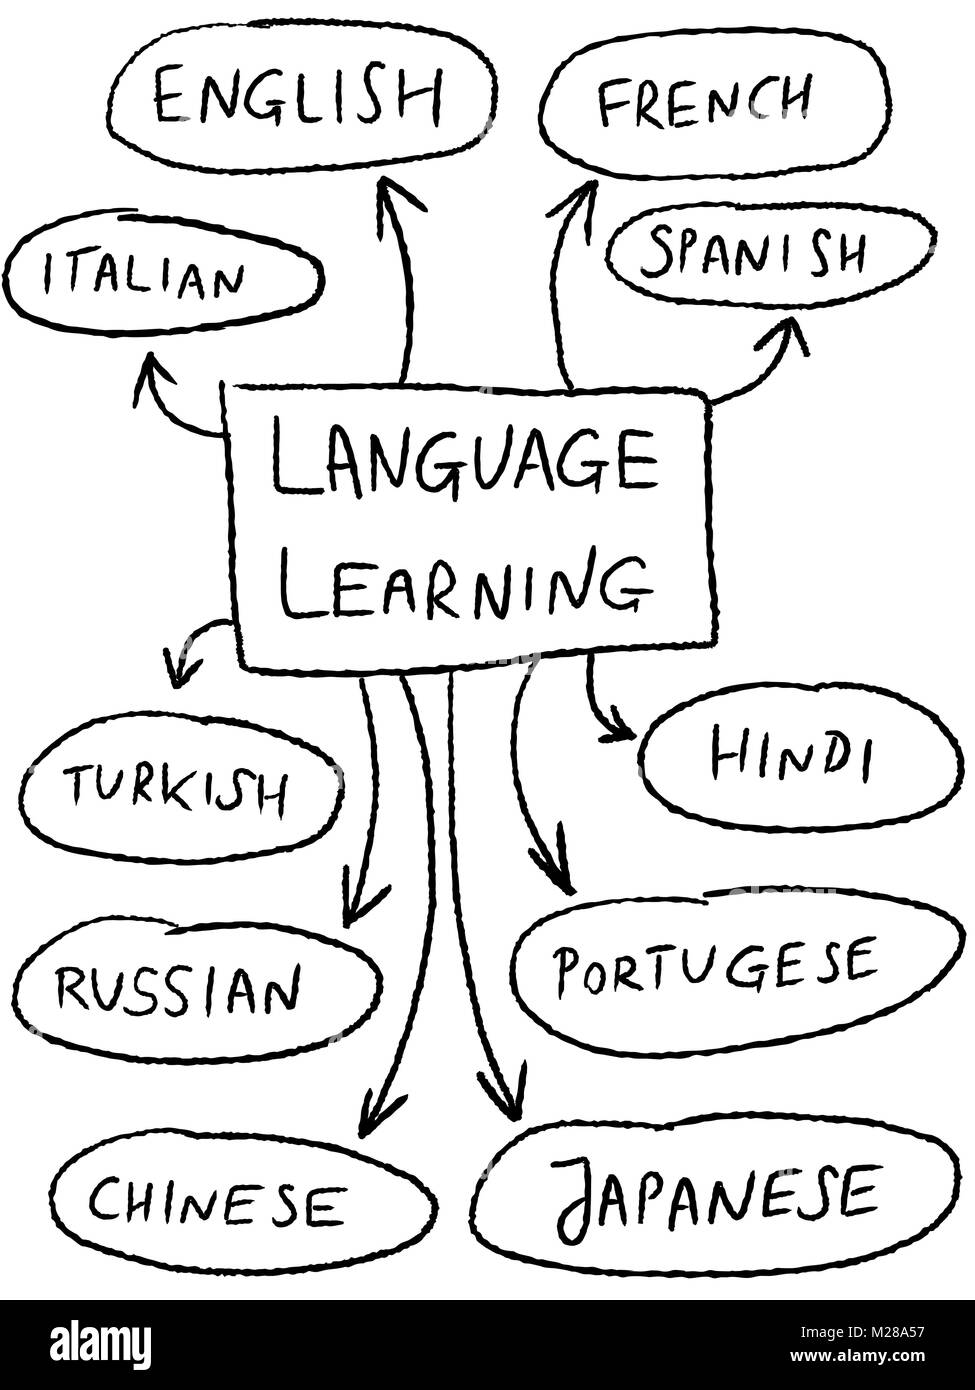 Language learning mind map - popular foreign languages. Stock Vector